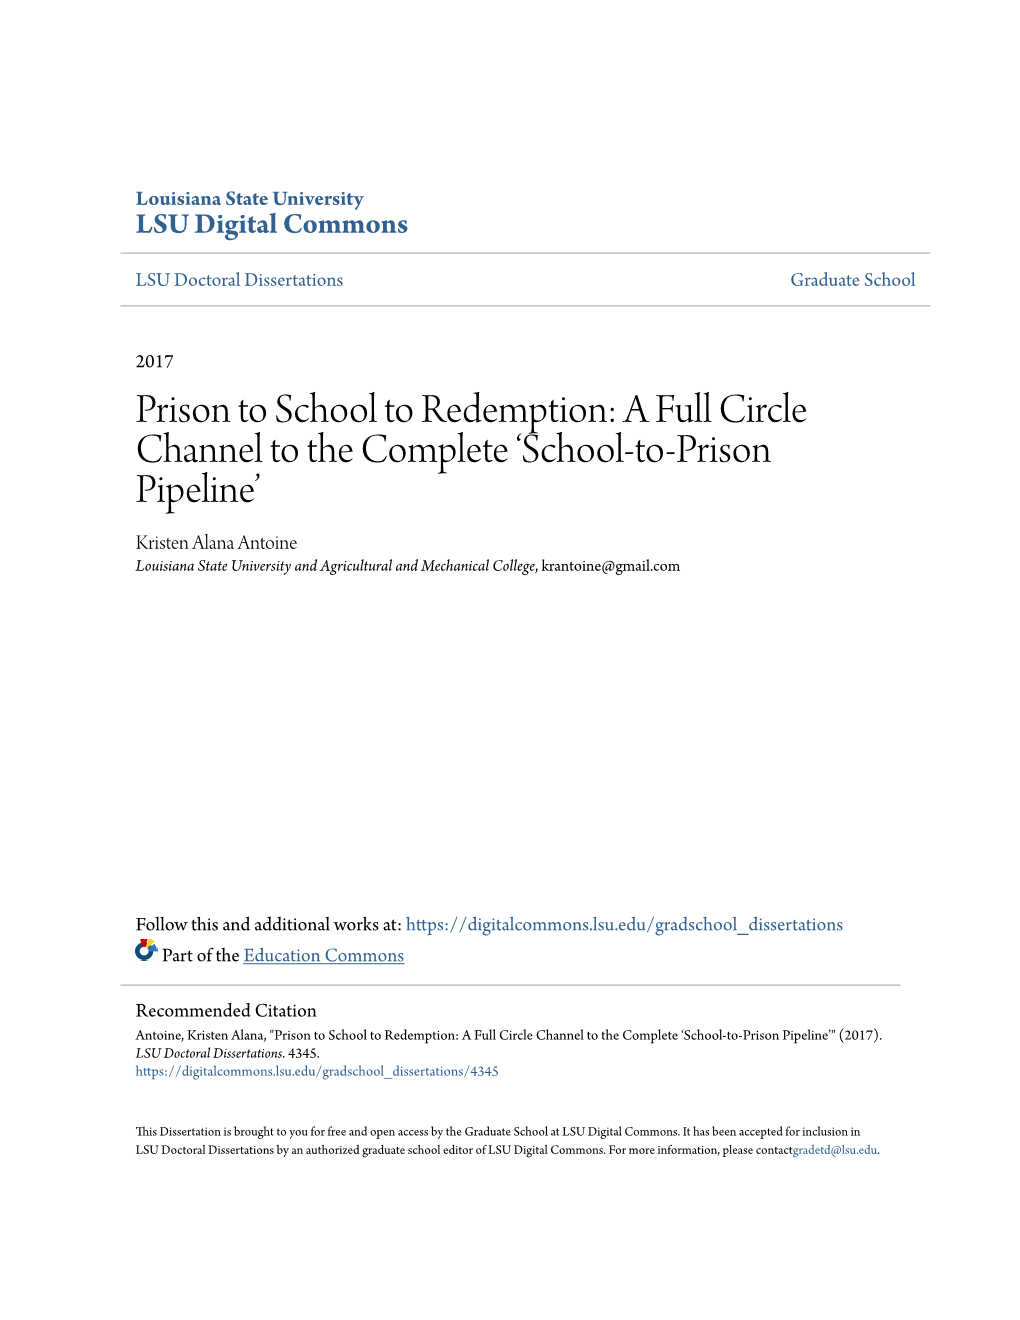 A Full Circle Channel to the Complete 'School-To-Prison Pipeline'